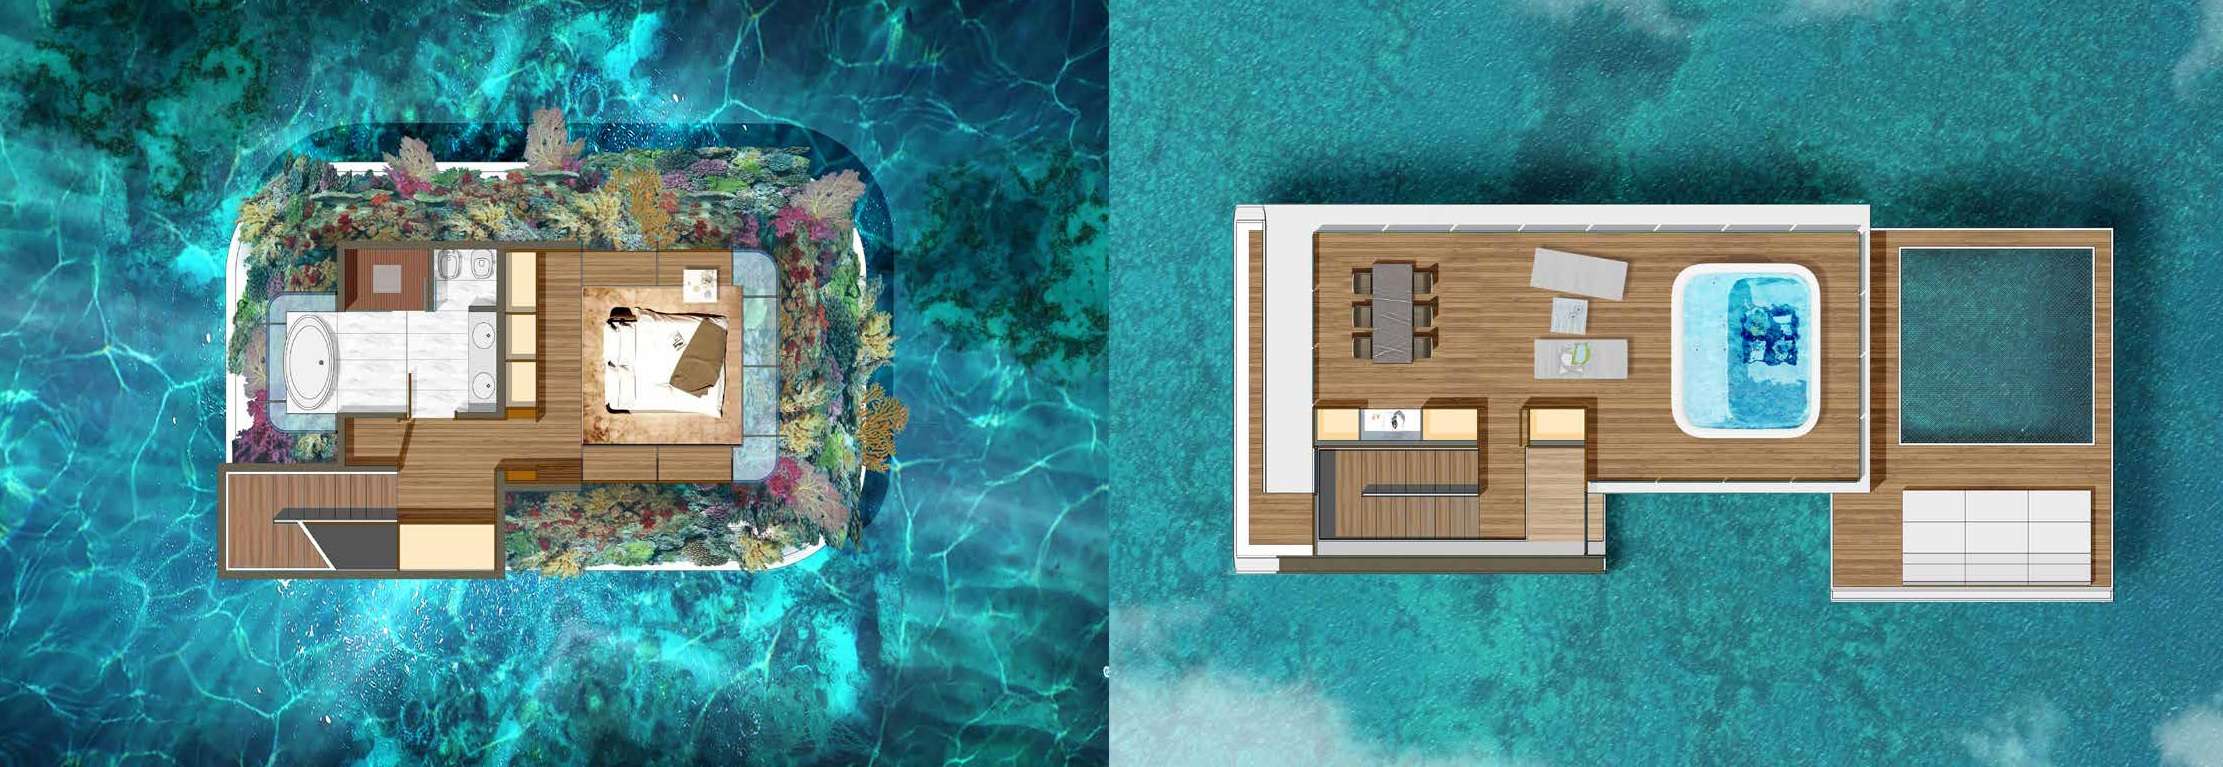 the floating seahorse apartment 4bhk 4004sqft21